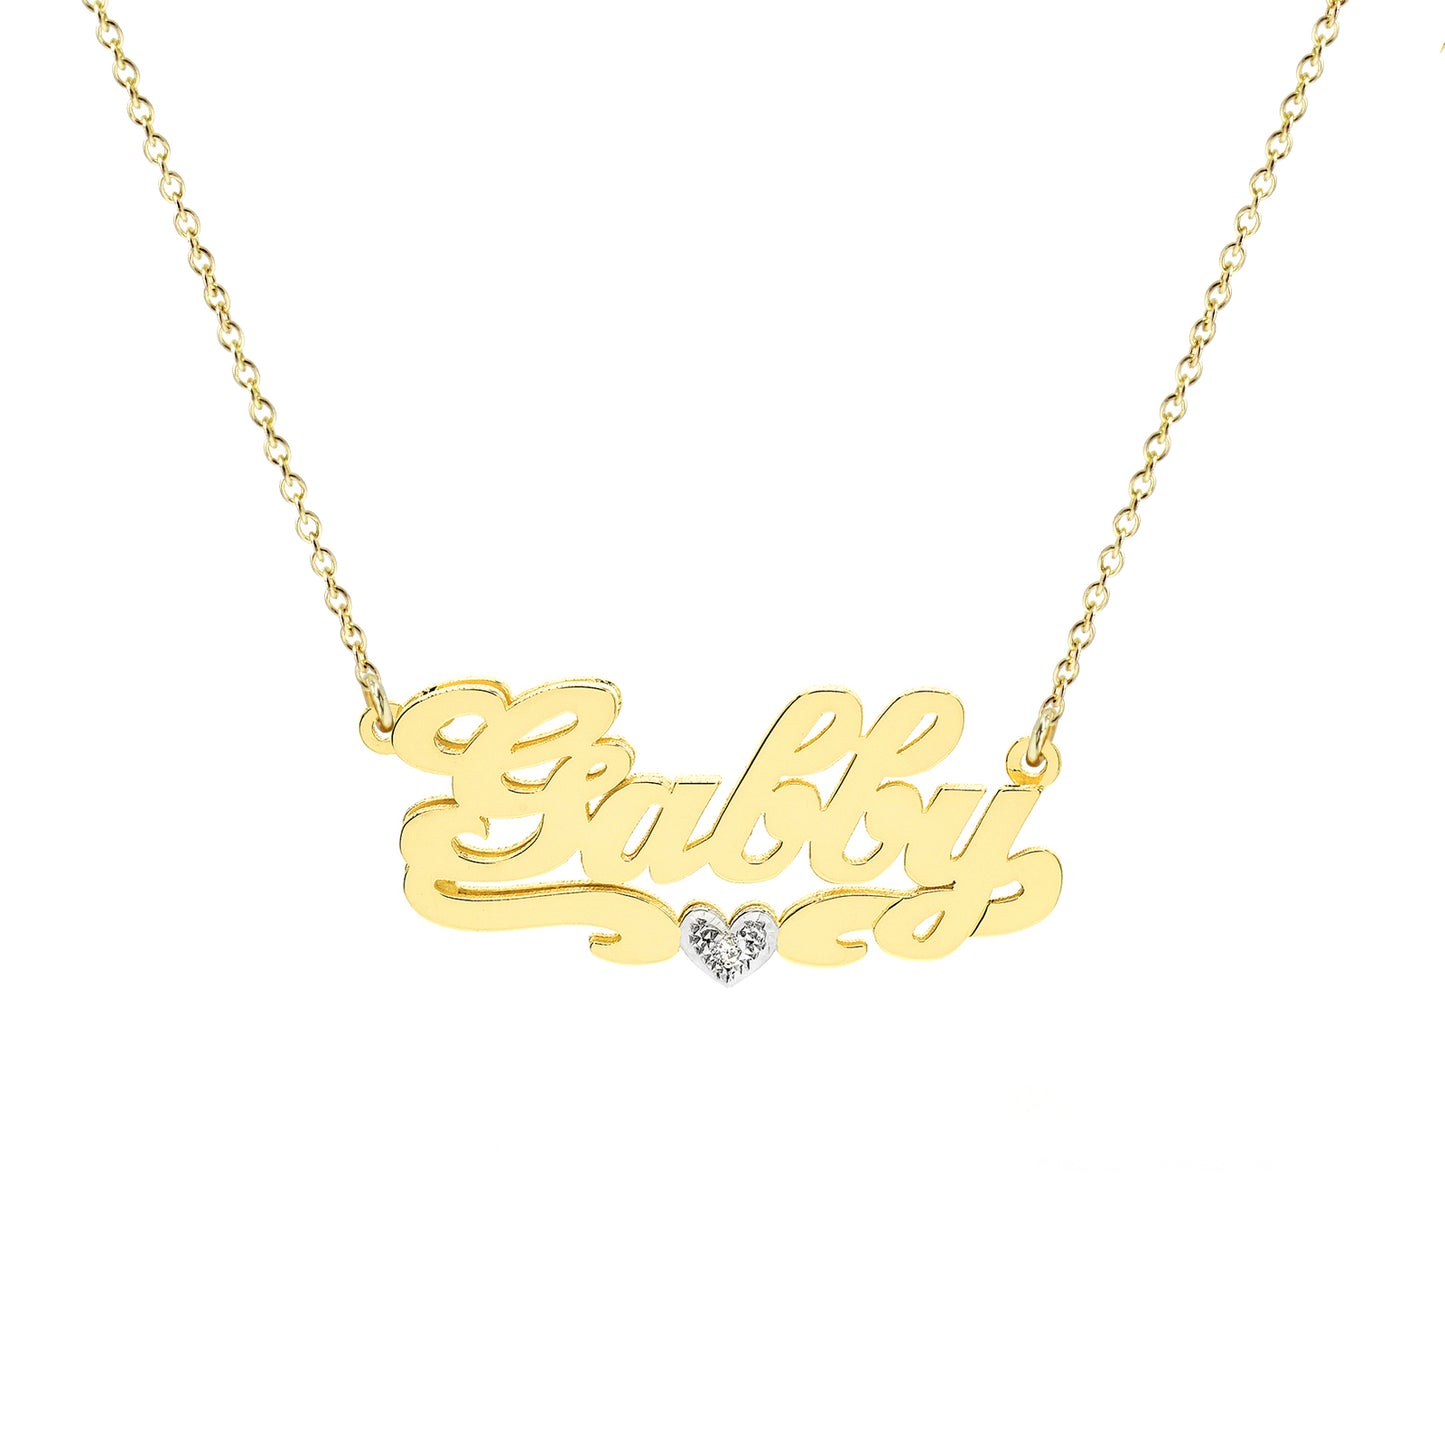 Personalized 14kt. Gold Name Plate Necklace with Diamond